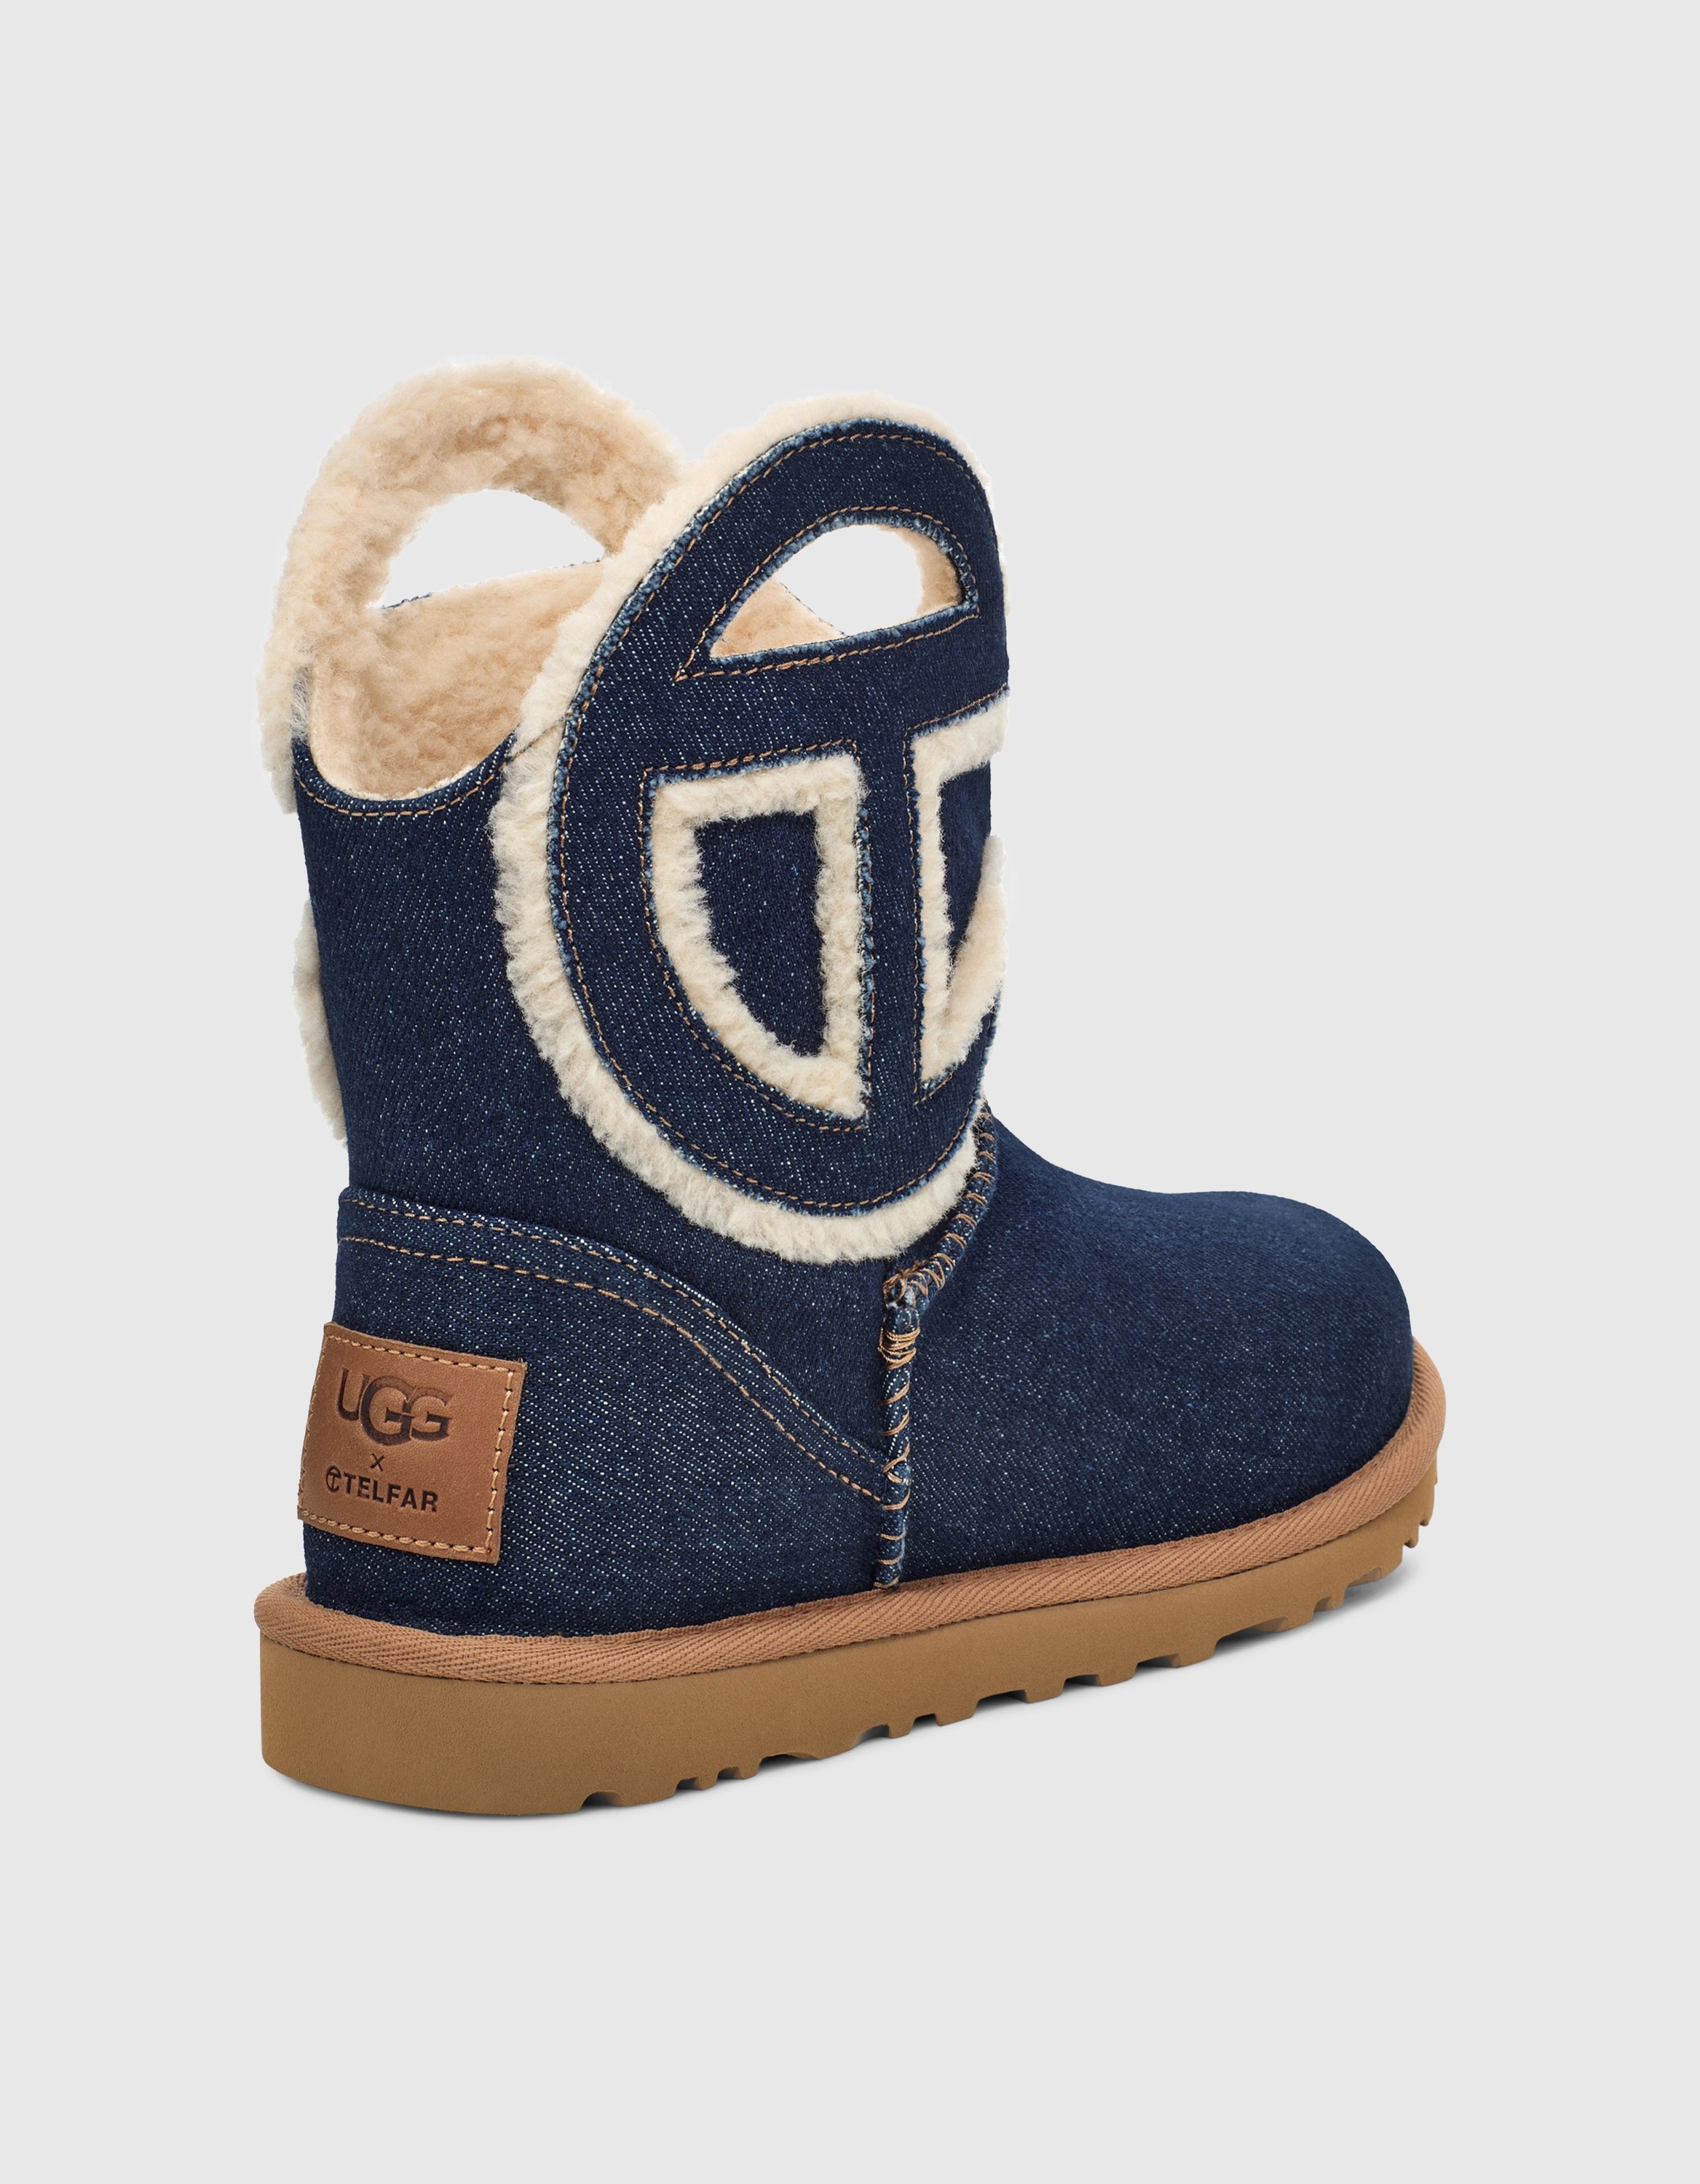 UGGS BOOT CARE PRODUCTS, Free Irish Shipping